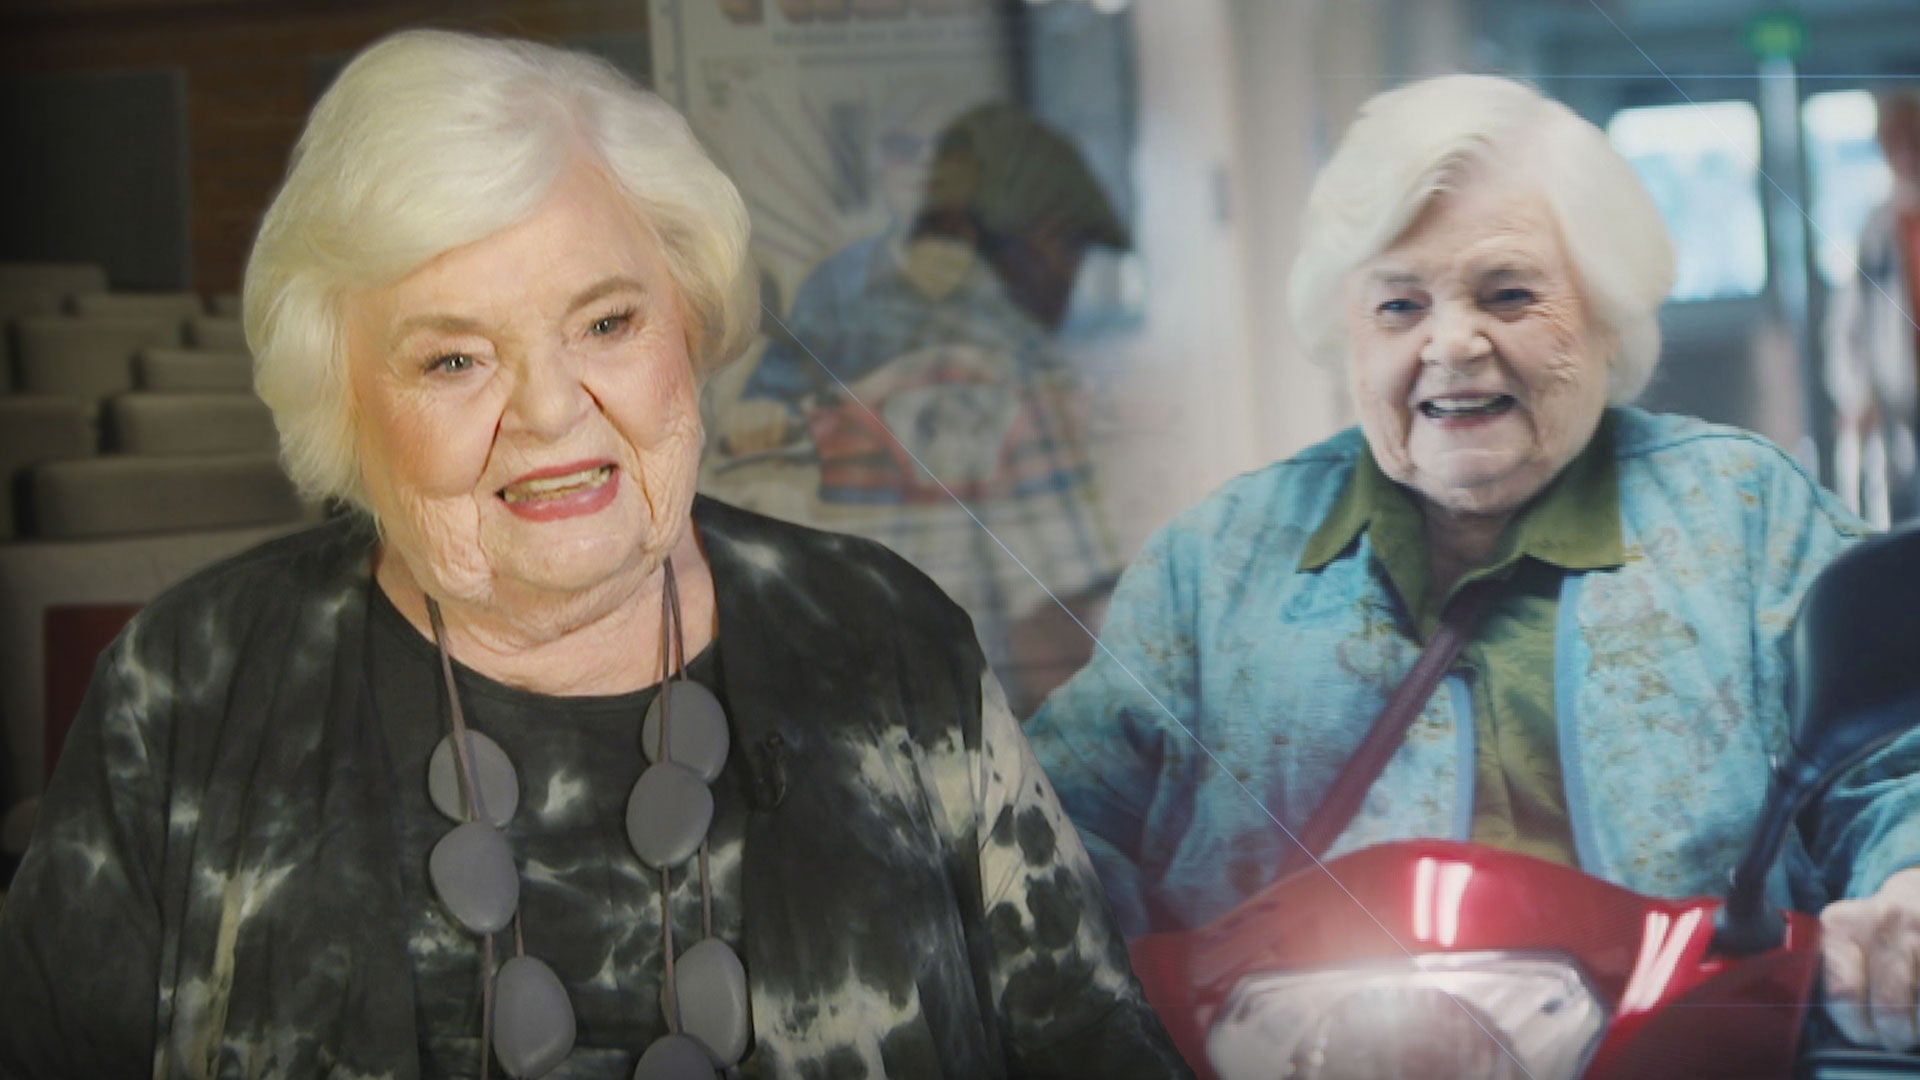 “Thelma’s June Squibb reacts to becoming an action star at 94 (exclusive)”